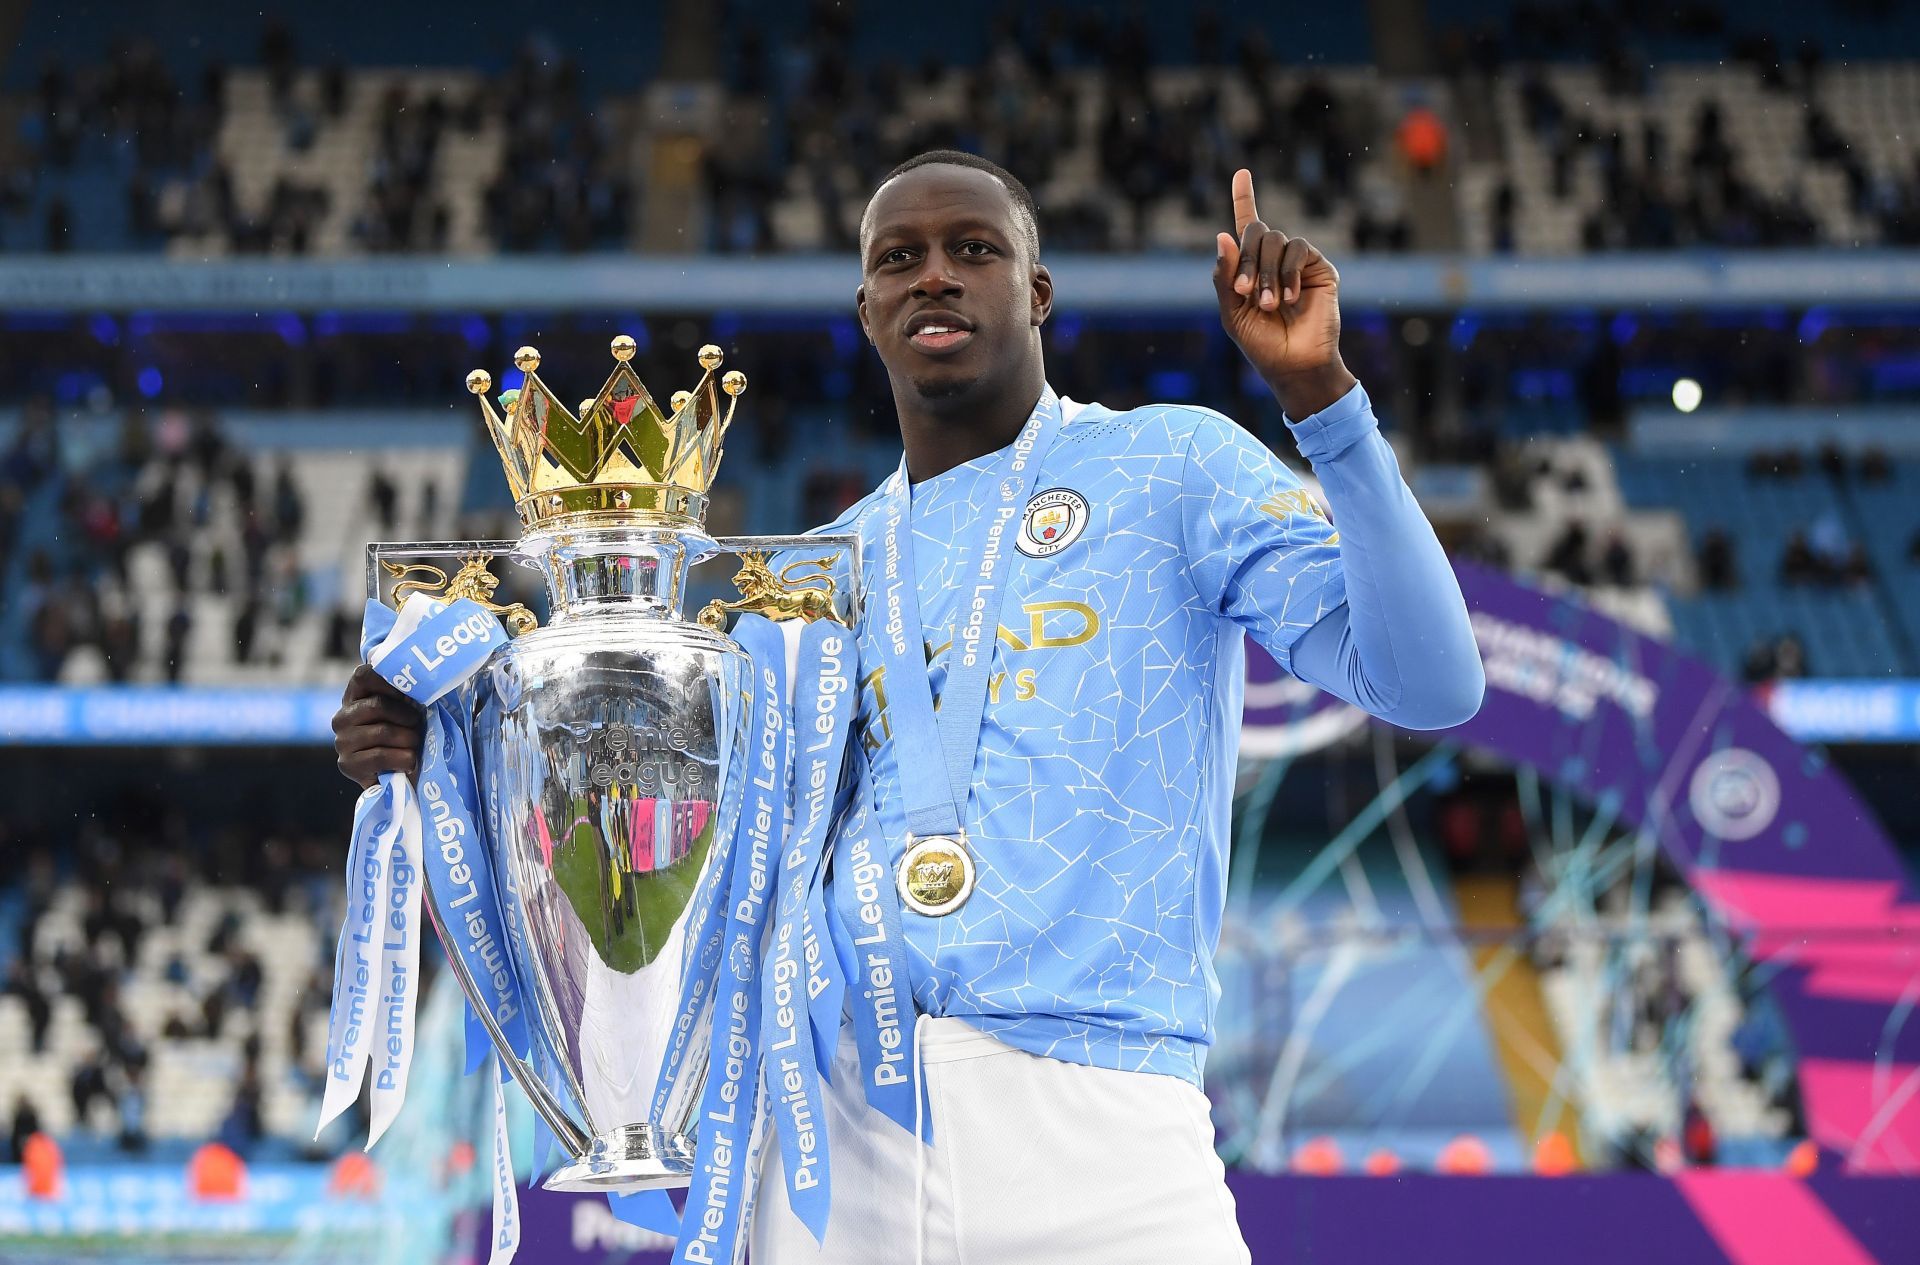 Mendy was once the most expensive defender in the world